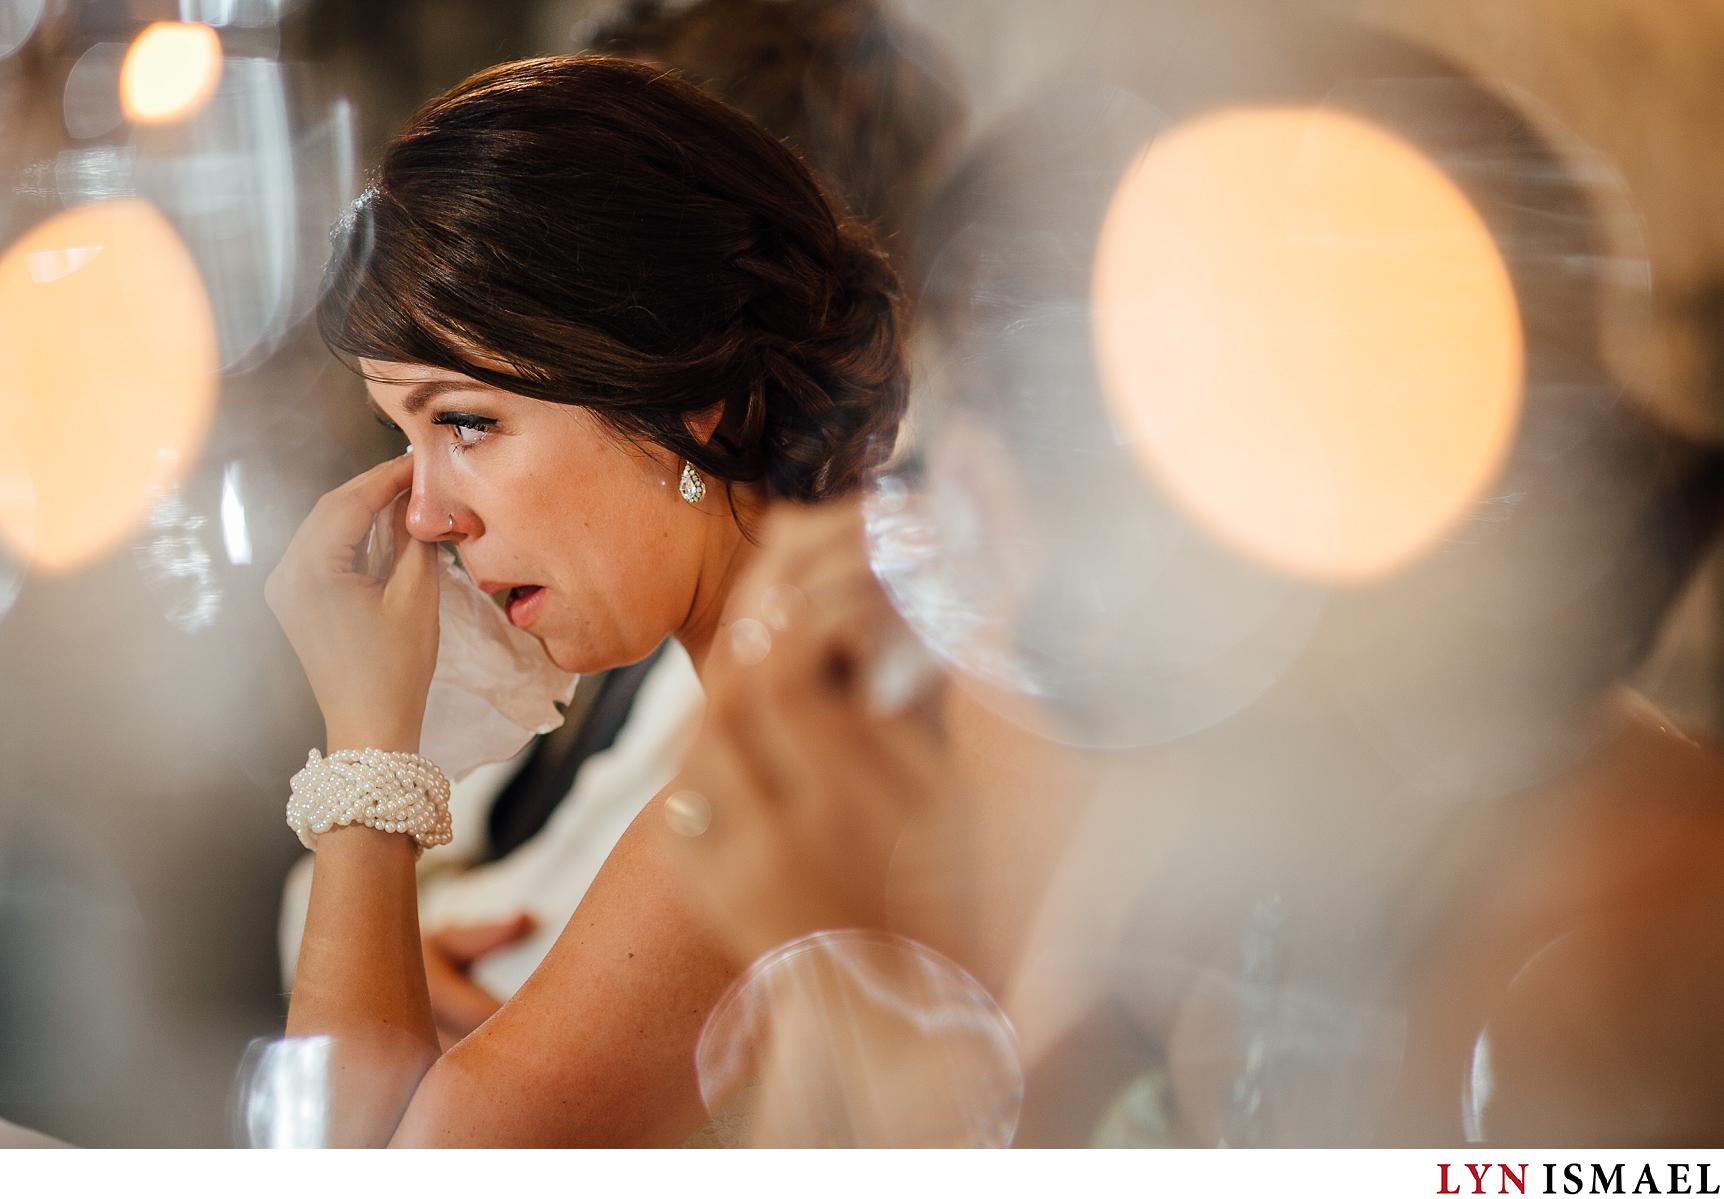 A bride is photographed wiping her tears by a Waterloo Region wedding photographer.